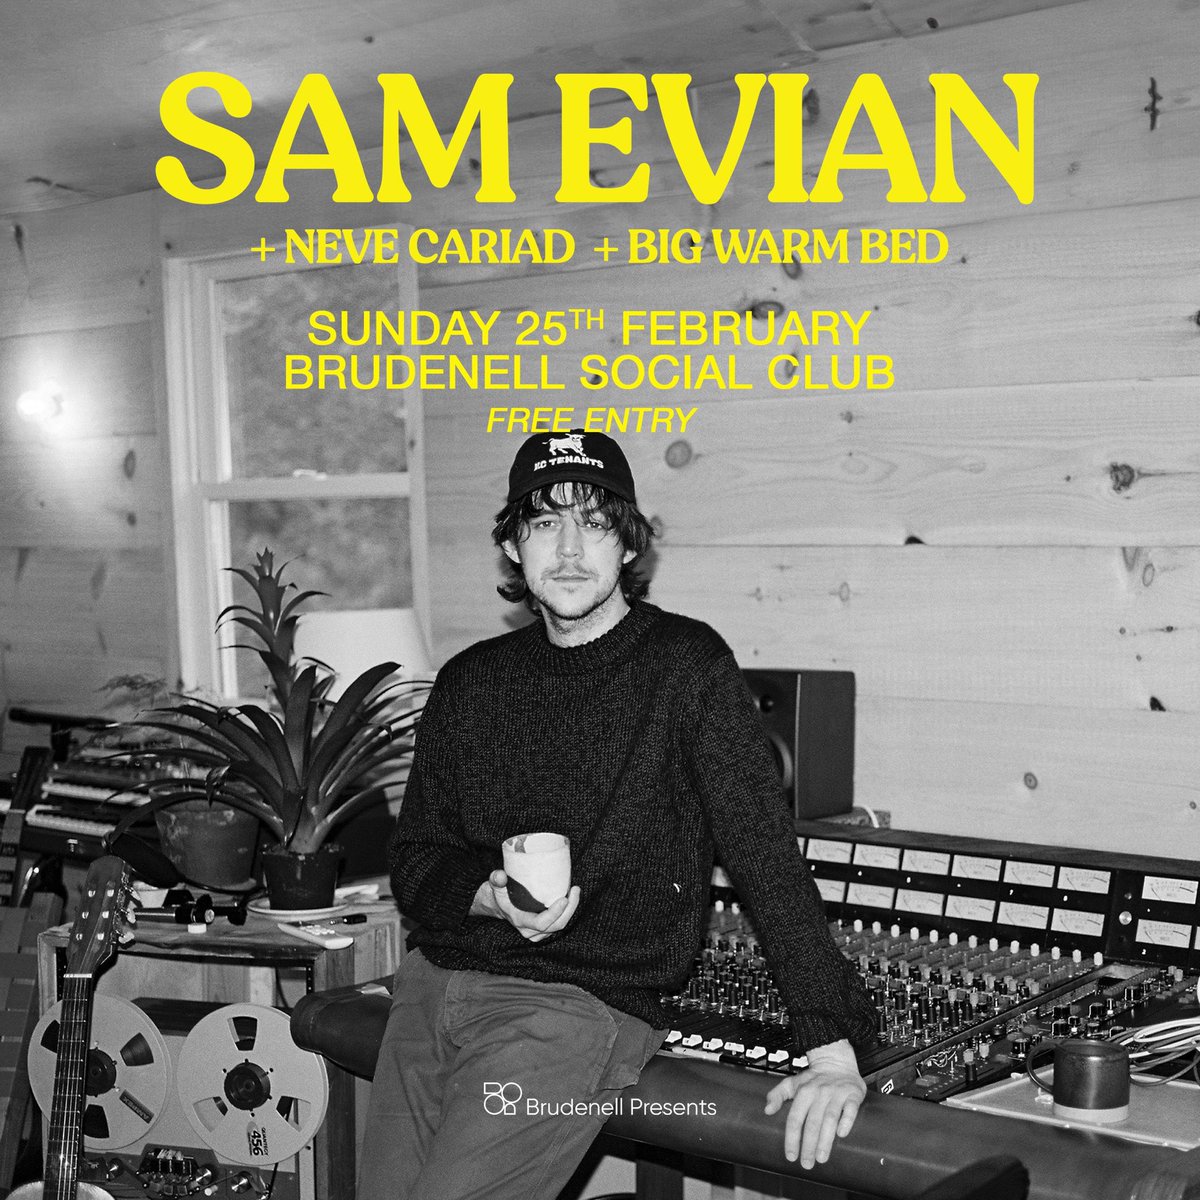 supporting @sam3vian at @Nath_Brudenell at the end of this month! excited for this one! love both sam and neve’s music, FREE entry, more info at the link in bio!